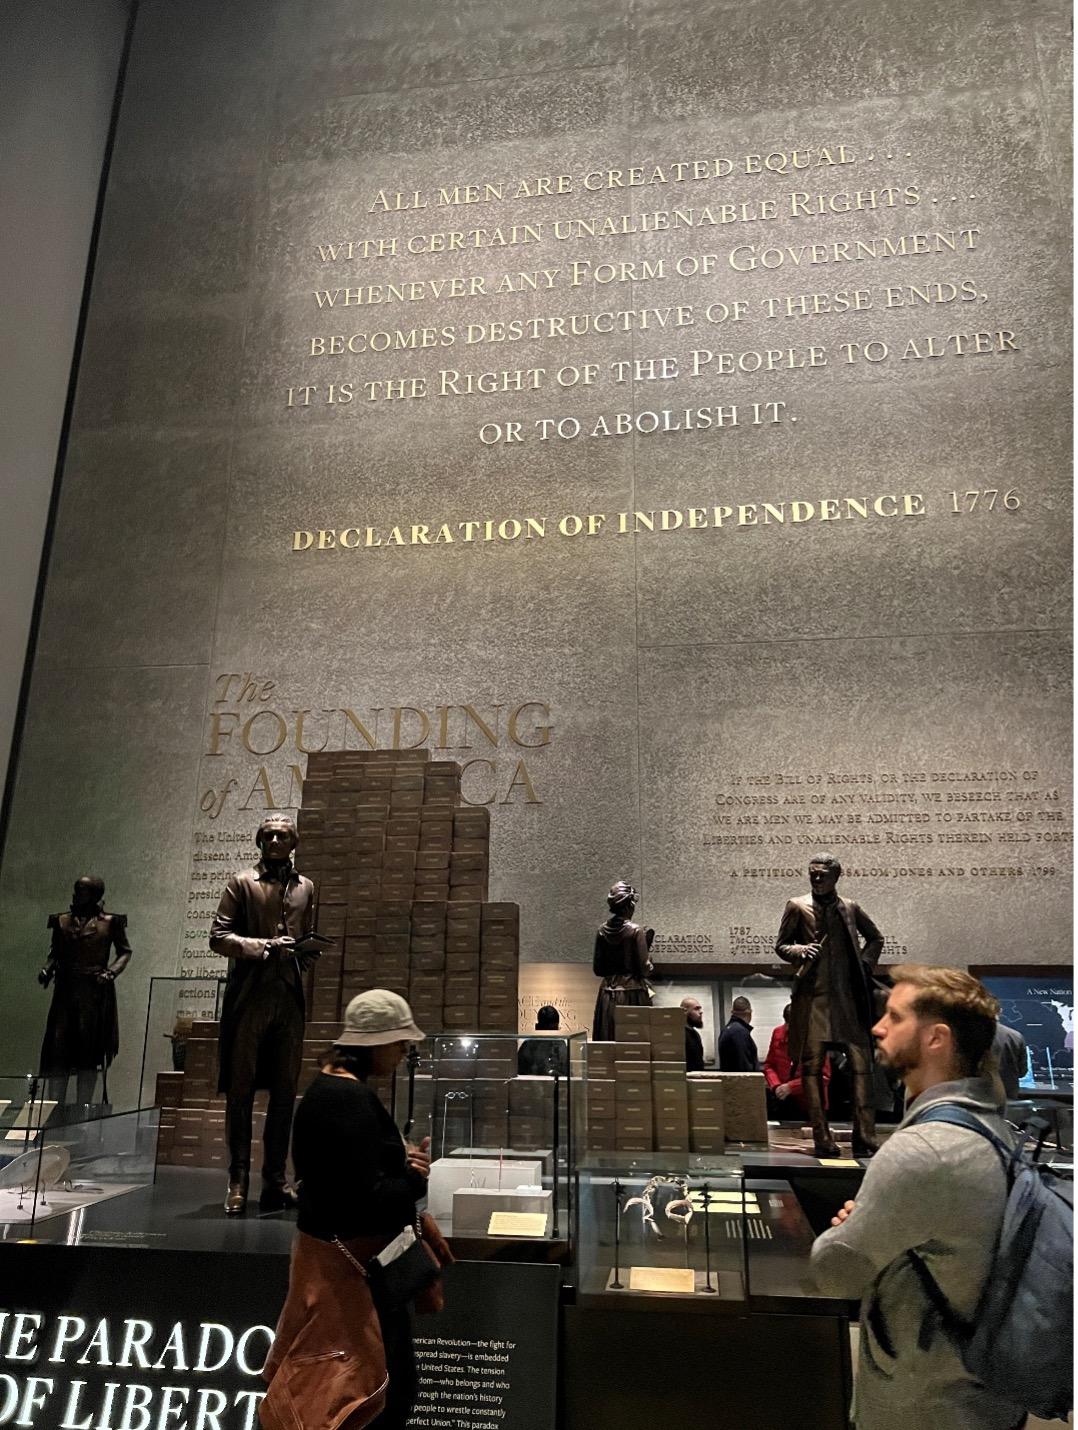 The museum contrasts the tenets of America’s founding with the realities of slavery. A bronze statue of Thomas Jefferson stands in front of bricks with the names of people he enslaved.